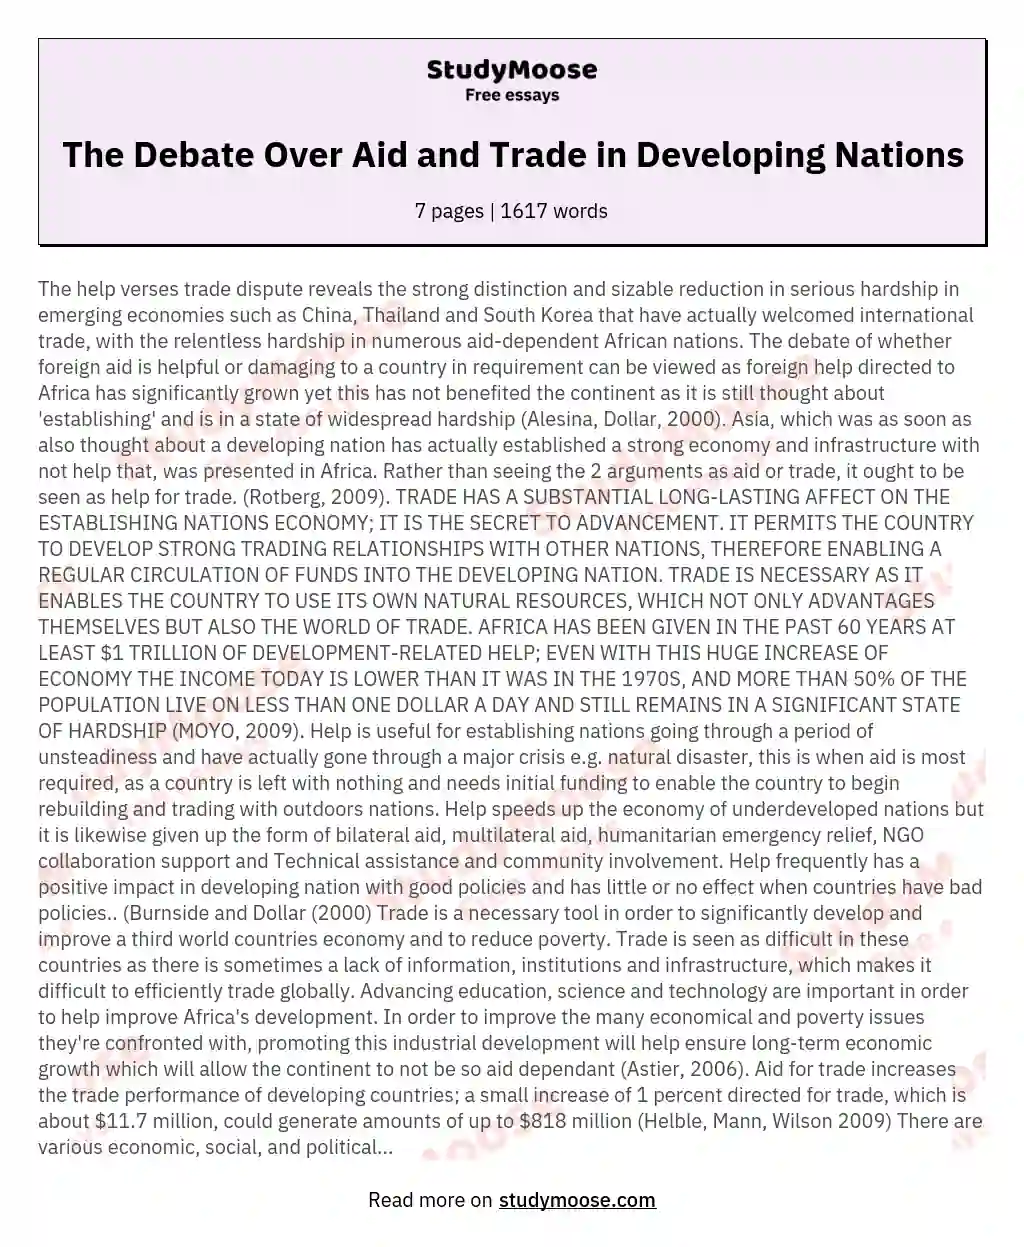 The Debate Over Aid and Trade in Developing Nations essay